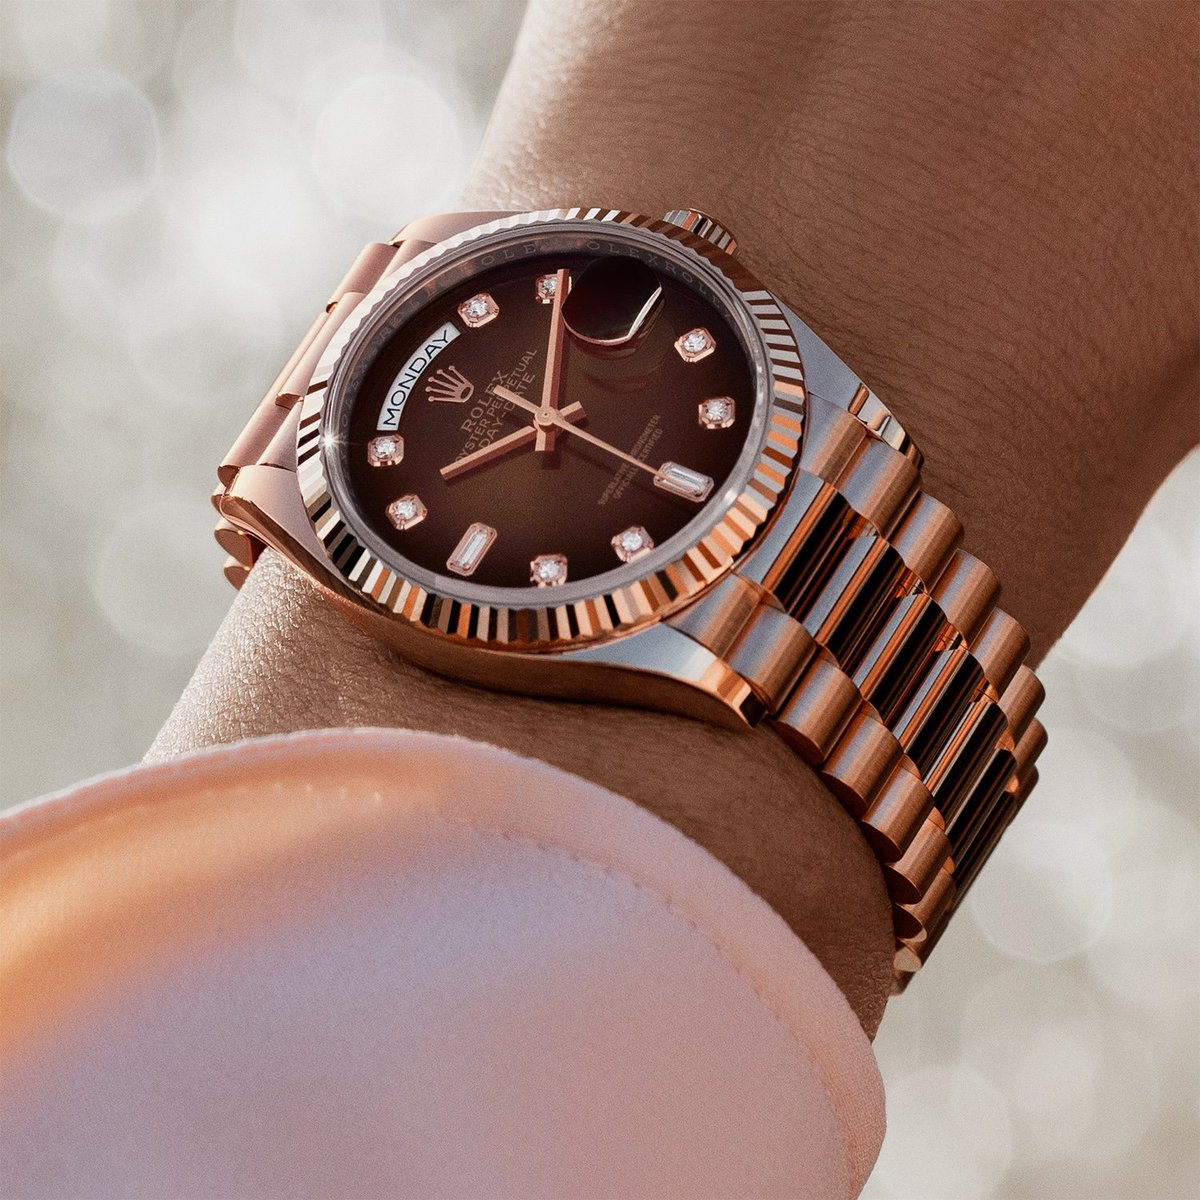 The ultimate watch of prestige. The @Rolex Day-Date 36 in 18 ct Everose gold, 36 mm case, brown ombré dial set with diamonds, President bracelet. #Rolex #DayDate #OfficialRolexRetailer